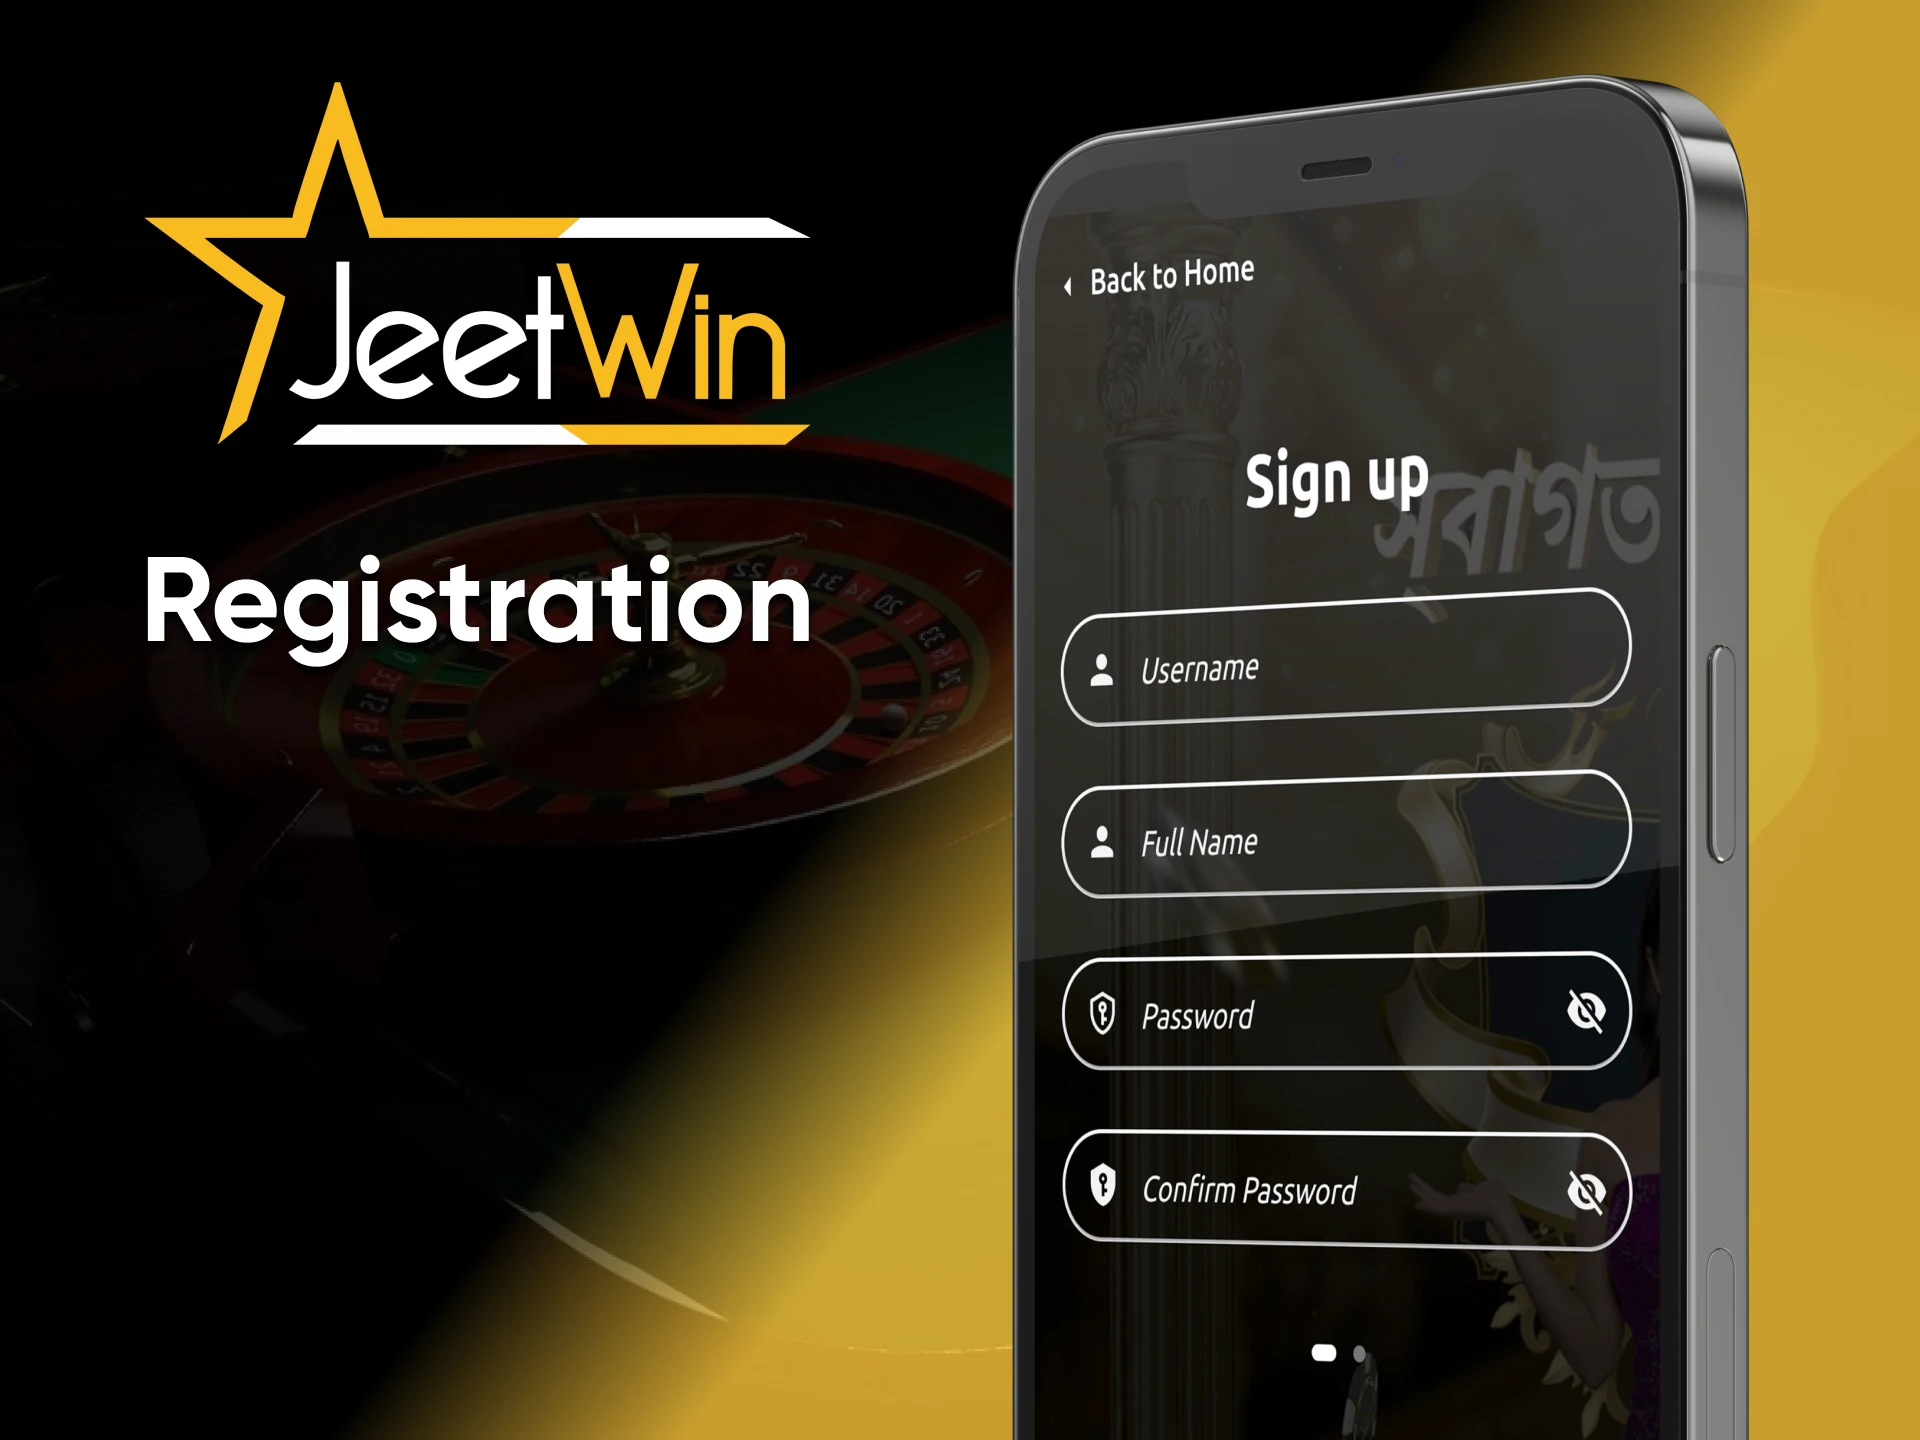 In order to fully play at Jeetwin Casino, you need to create an account.